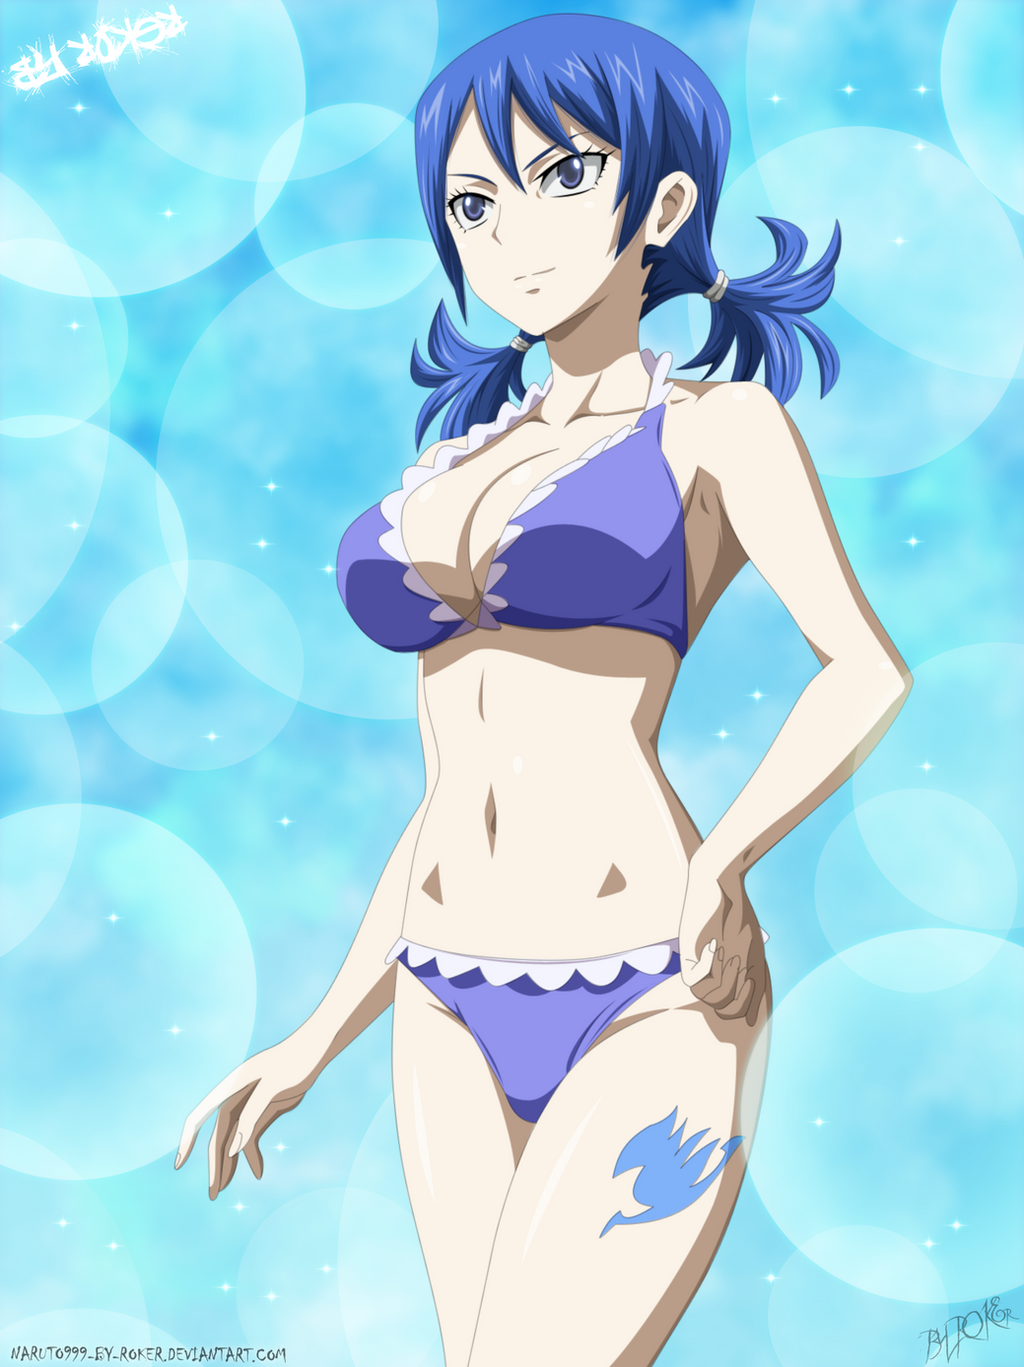 juvia_loxar_de__fairy_tail__by_naruto999_by_roker-d5r3ozt.png